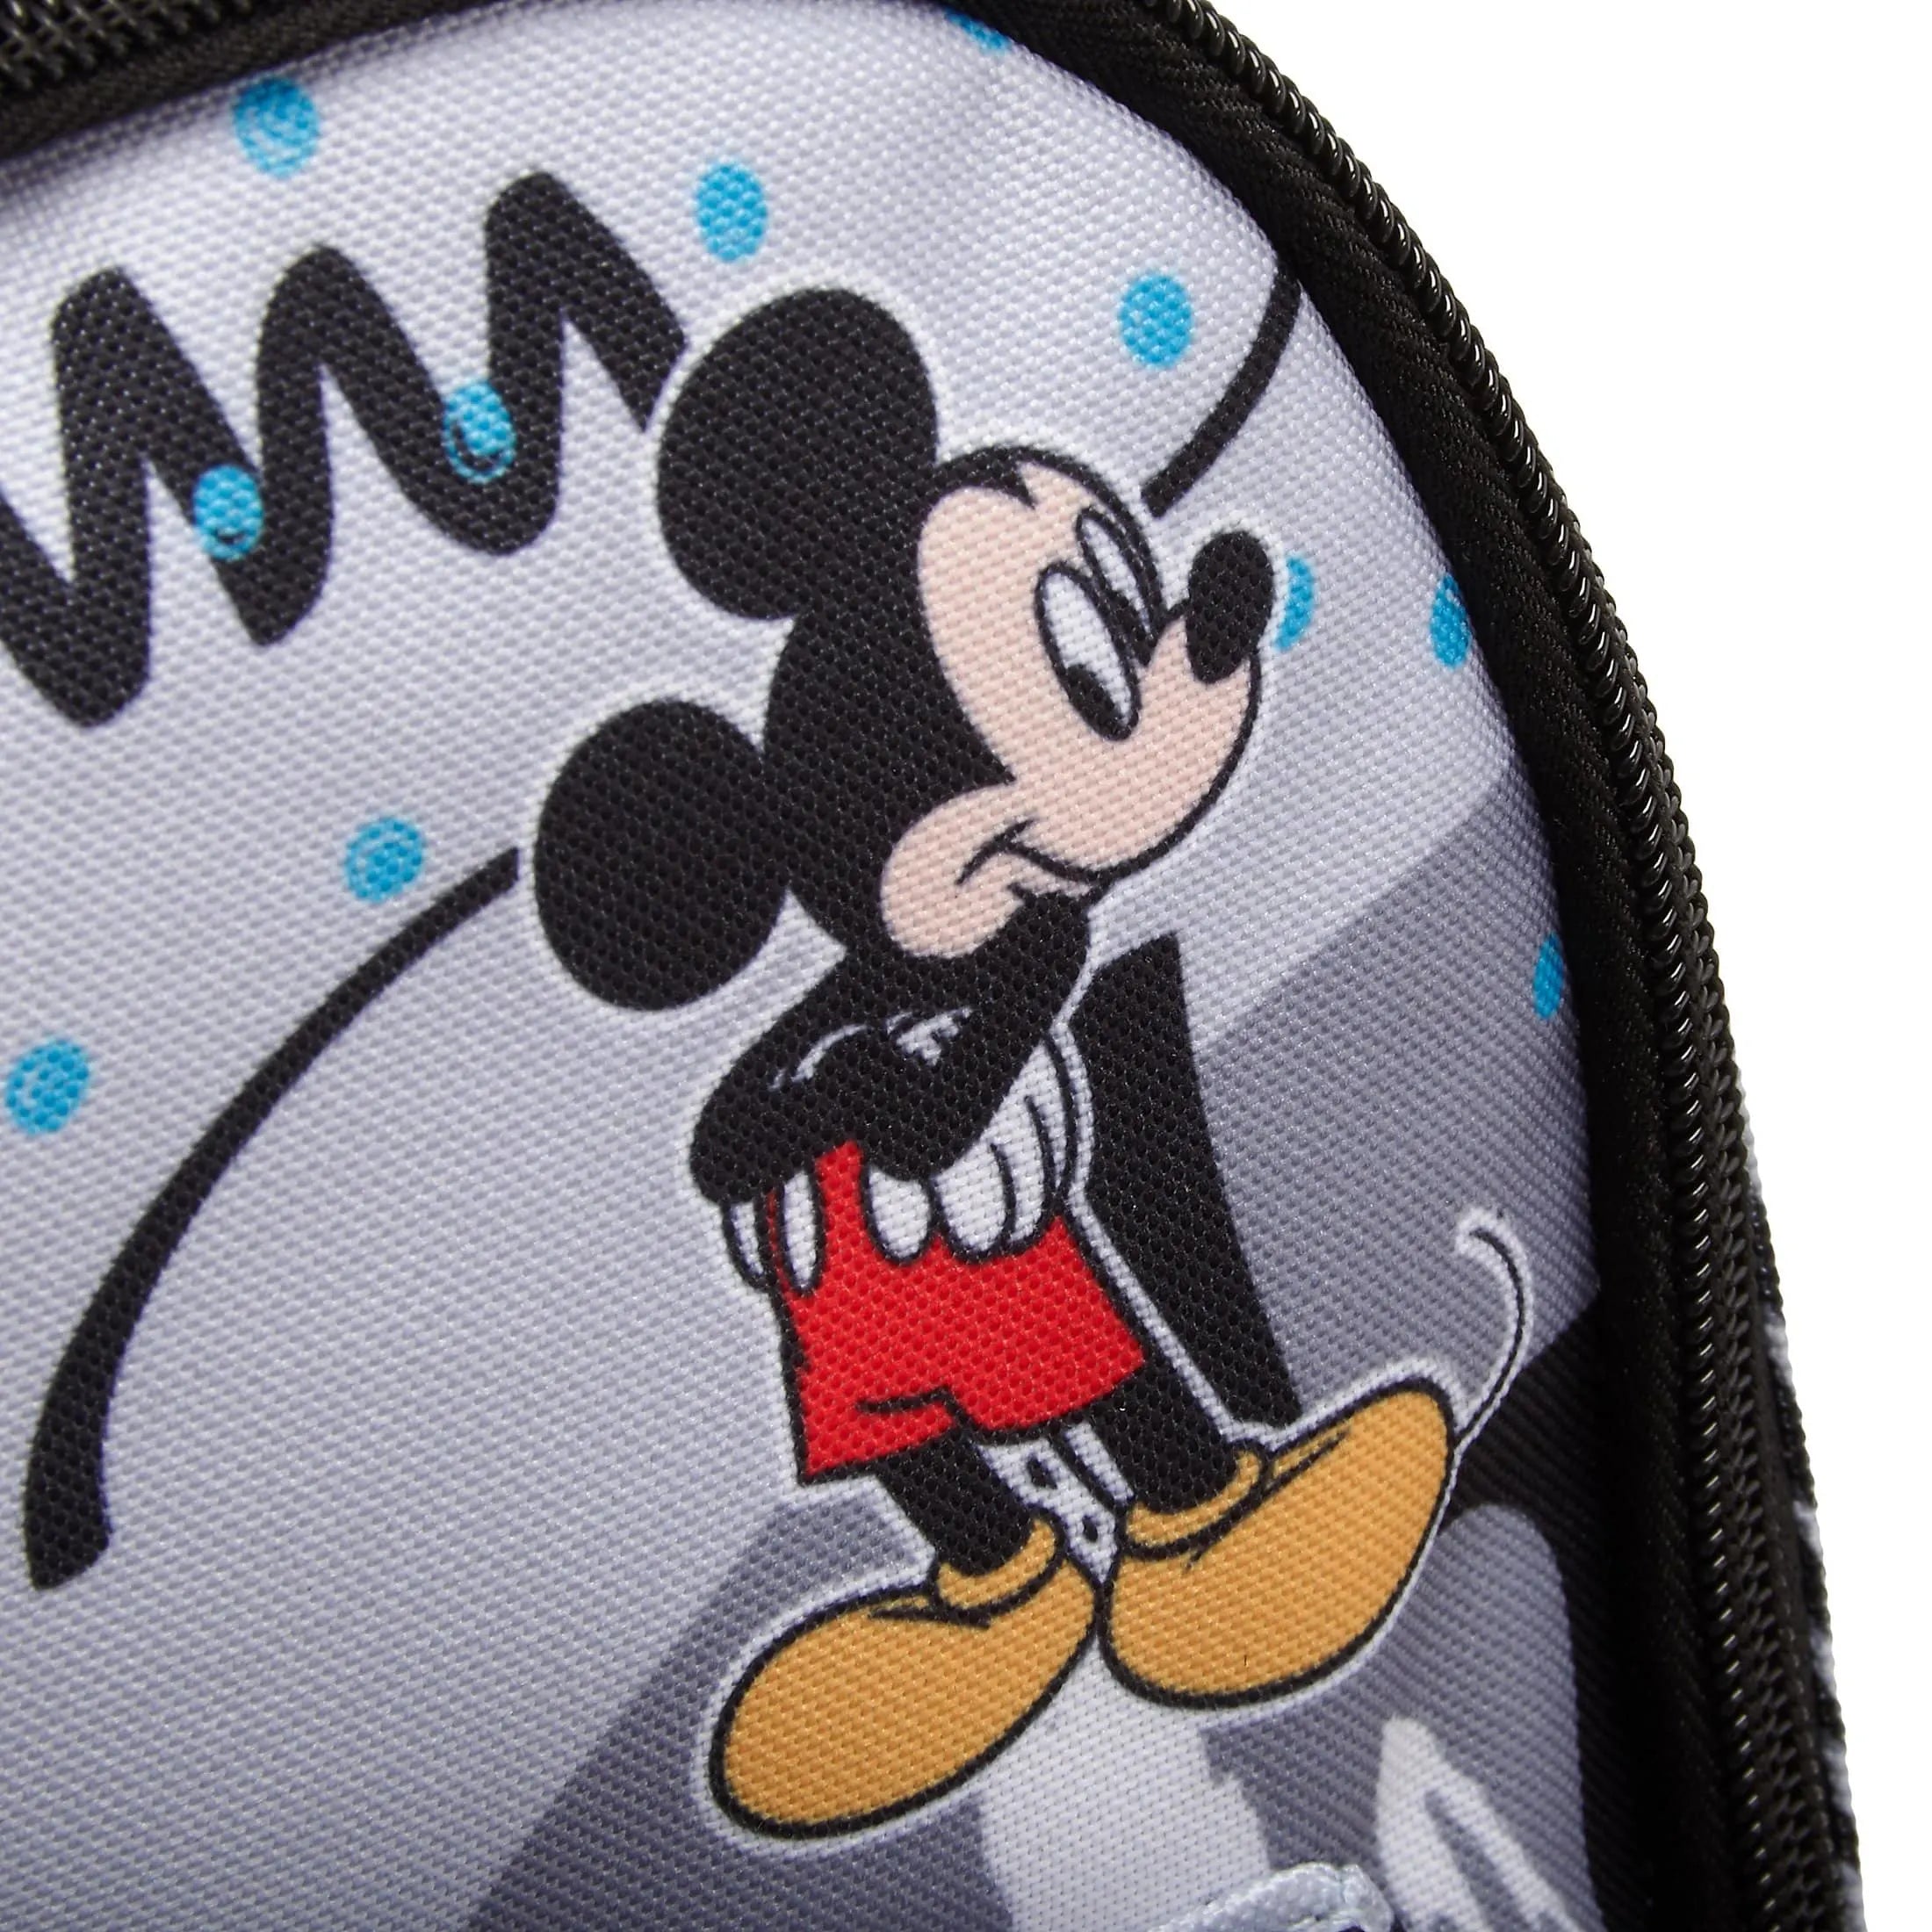 Fabrizio Disney Mickey Mouse children's backpack 29 cm - turquoise